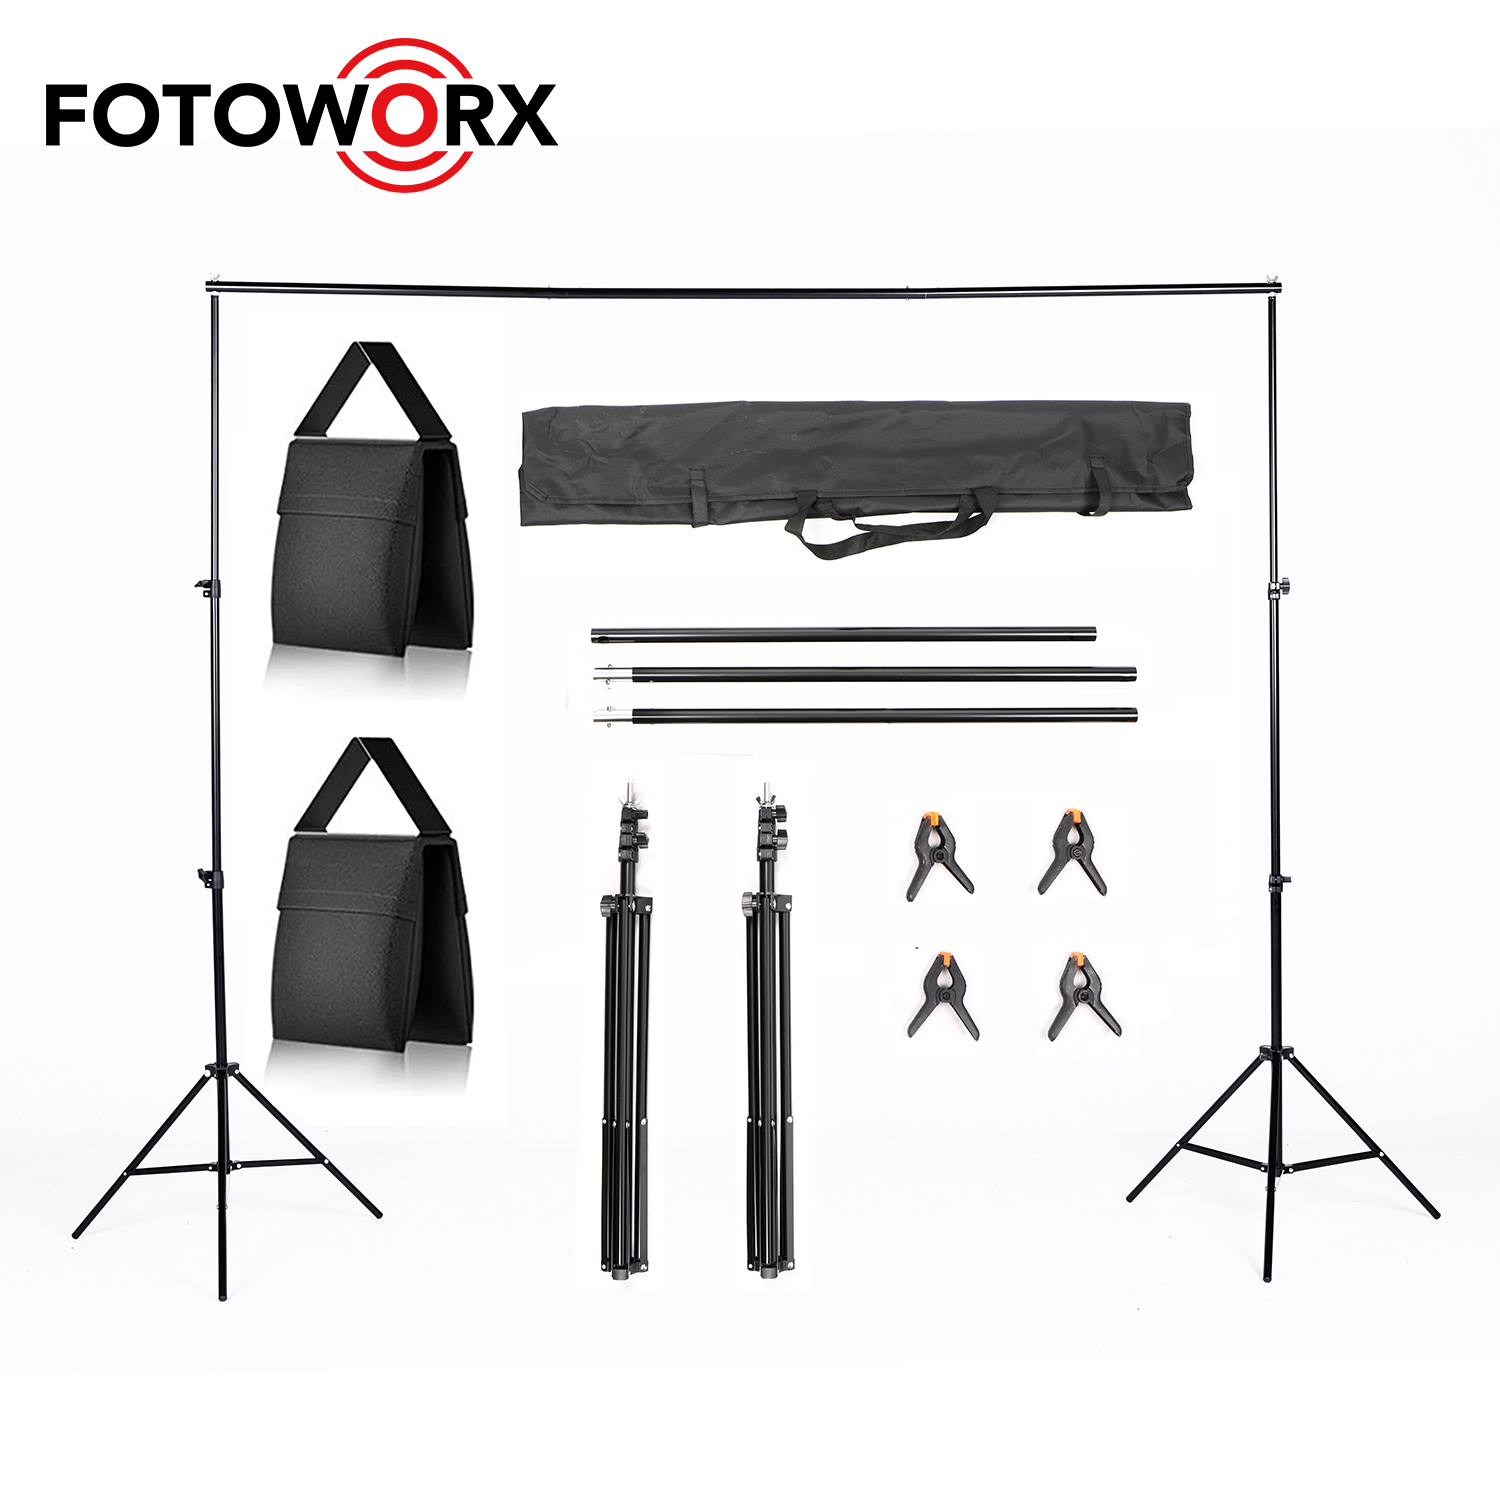 Backdrop Stands That Make Your Photos Perfect